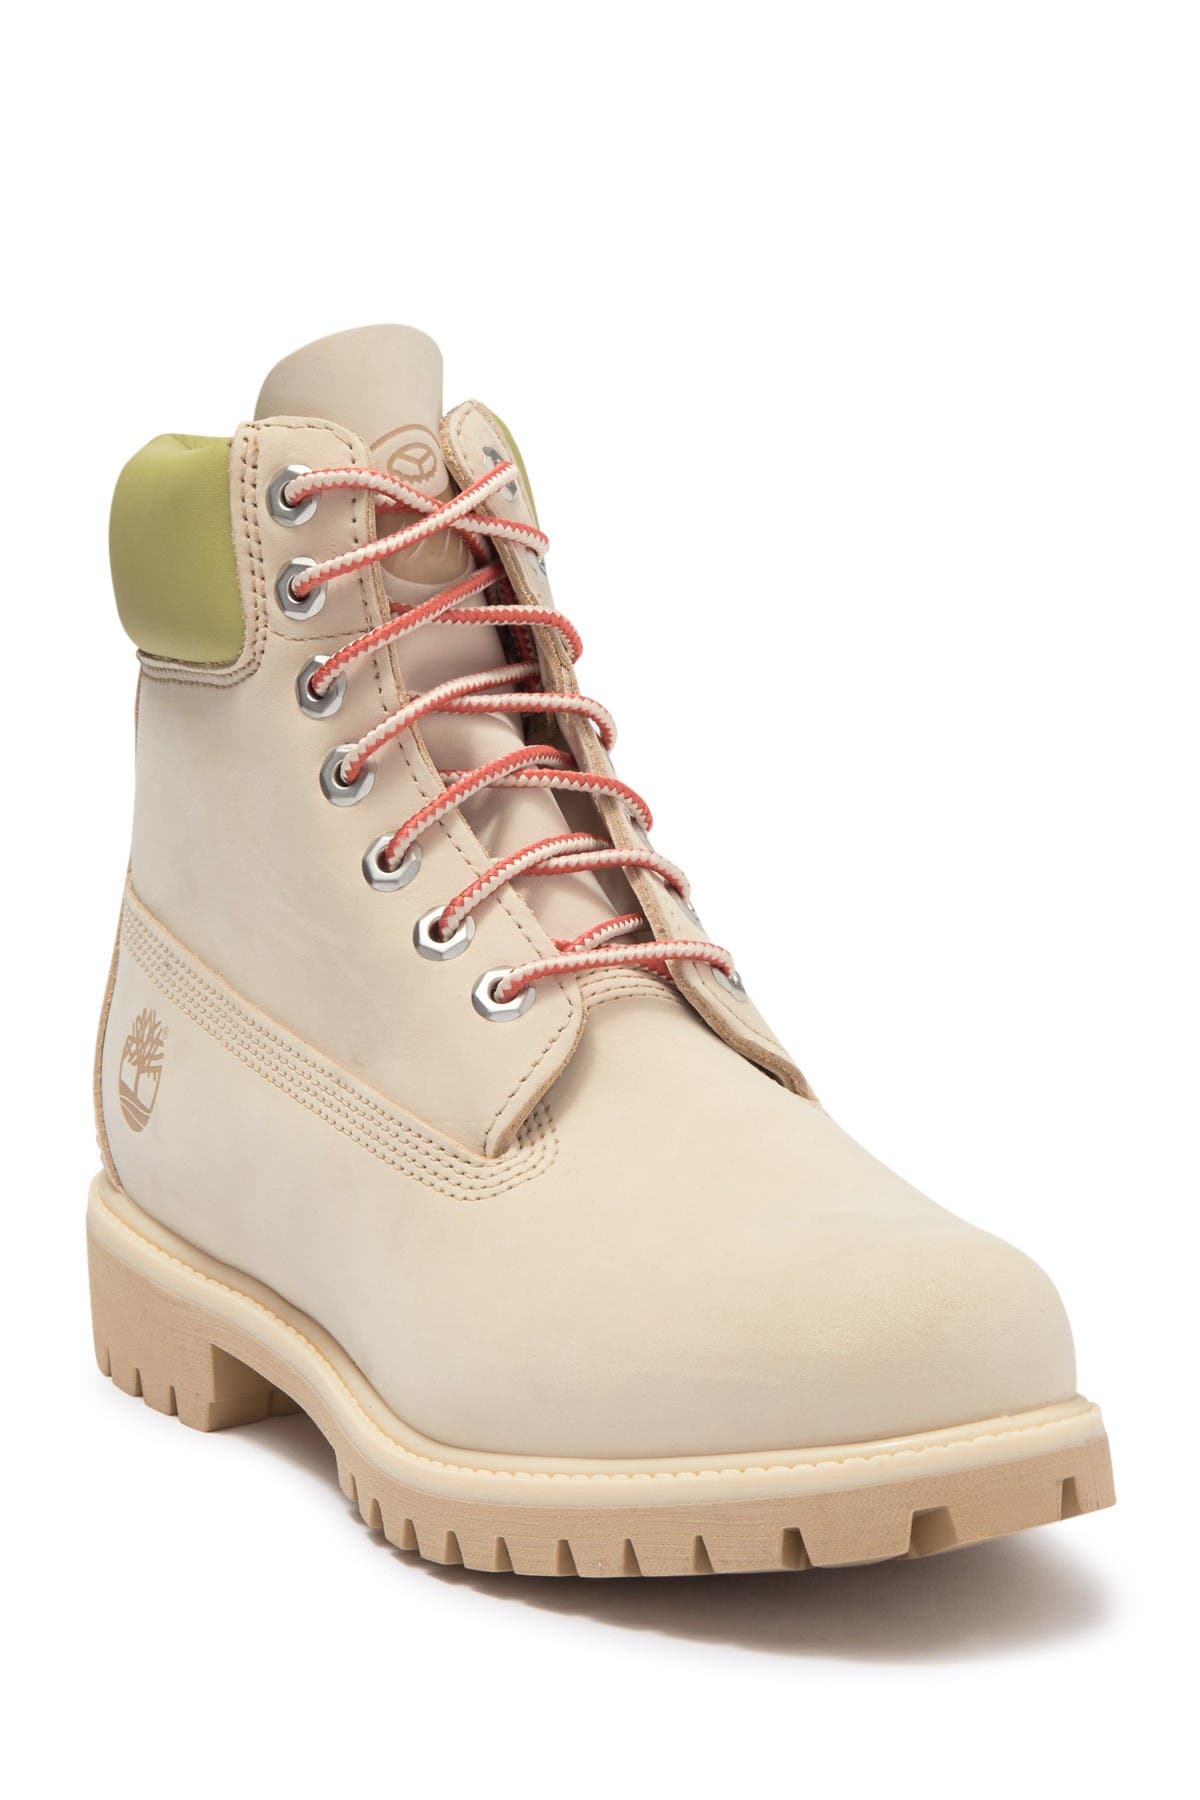 timberland boots nordstrom rack